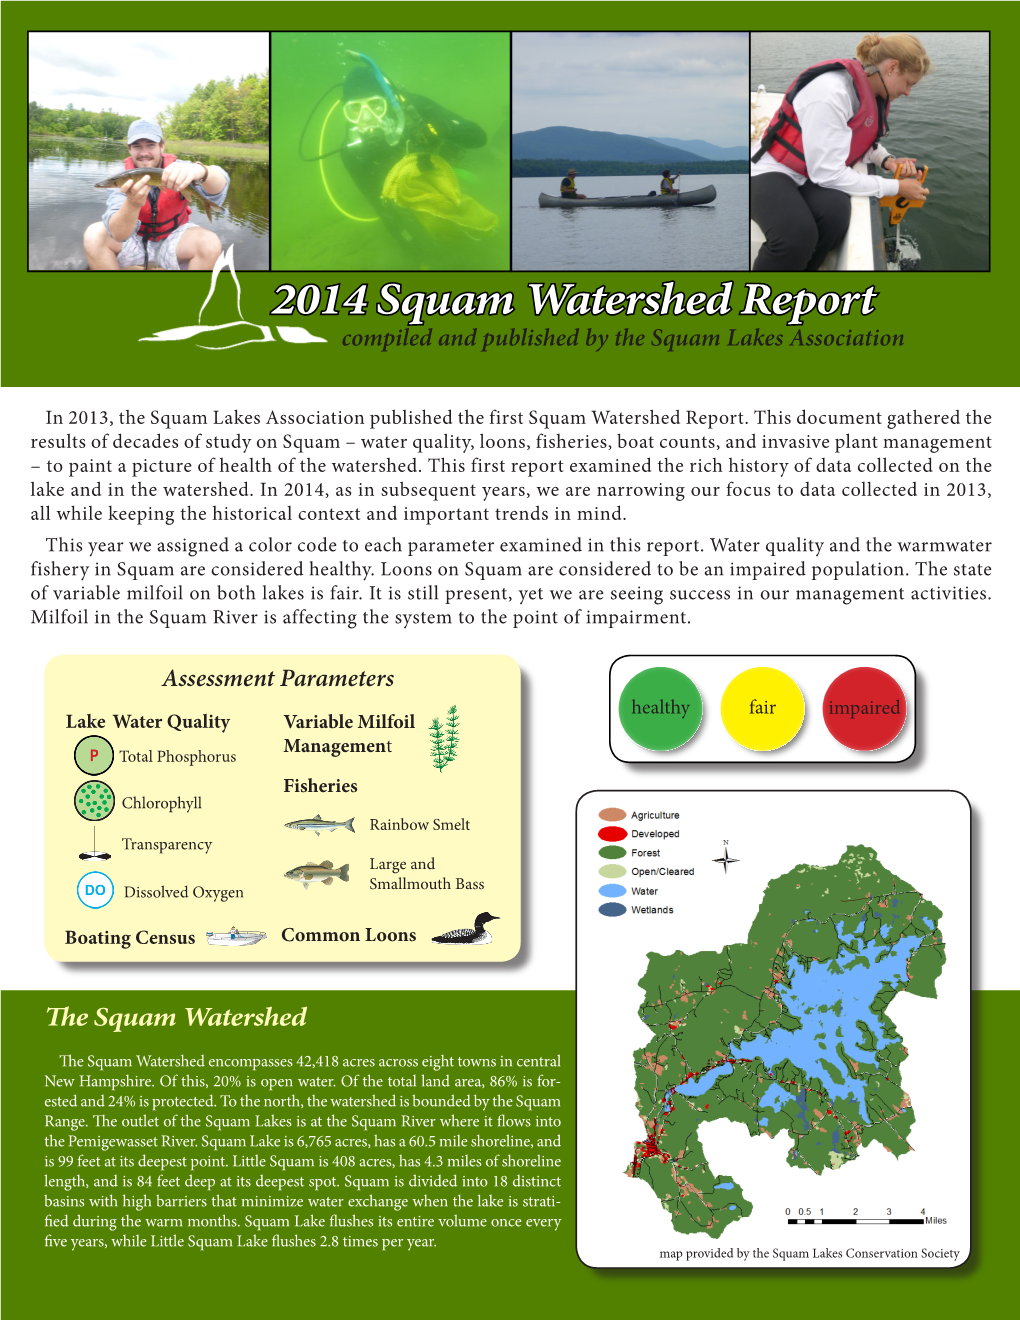 2014 Squam Watershed Report Compiled and Published by the Squam Lakes Association